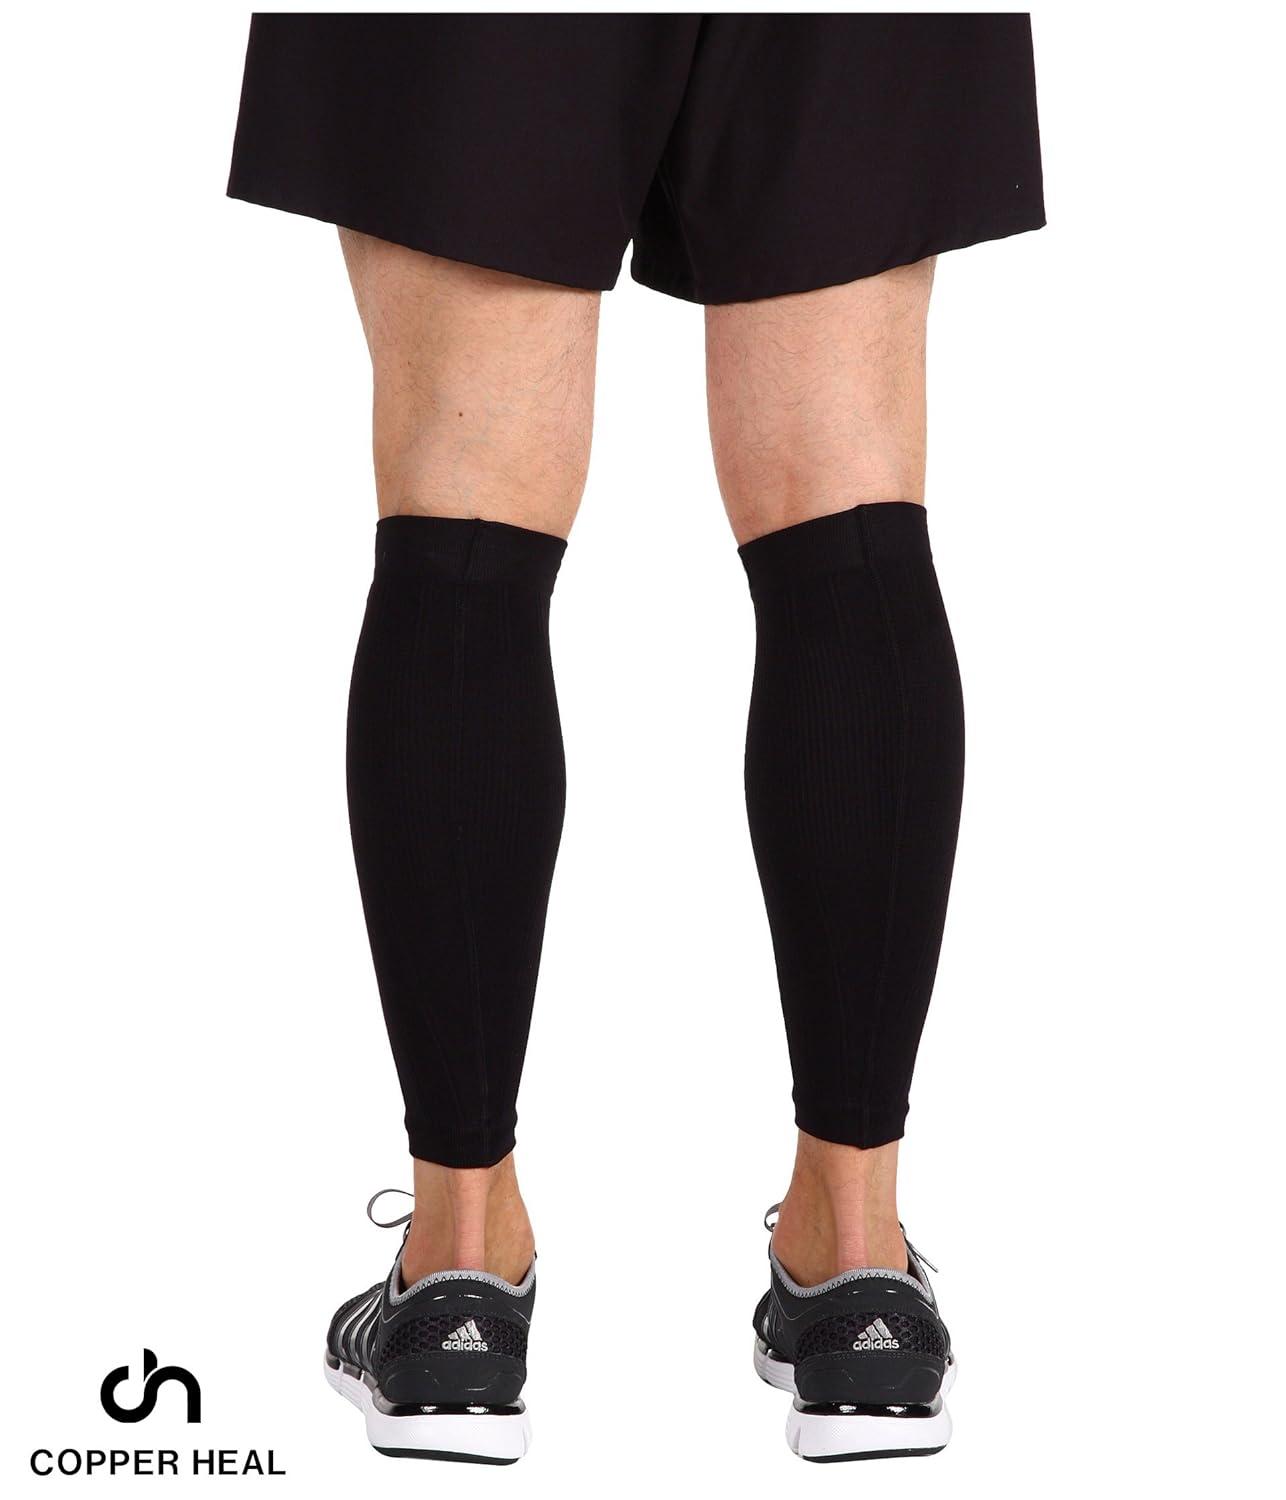 CEP - Men's THE RUN COMPRESSION CALF SLEEVES, stabilizing calf compression  sleeves for running, calf support, Black